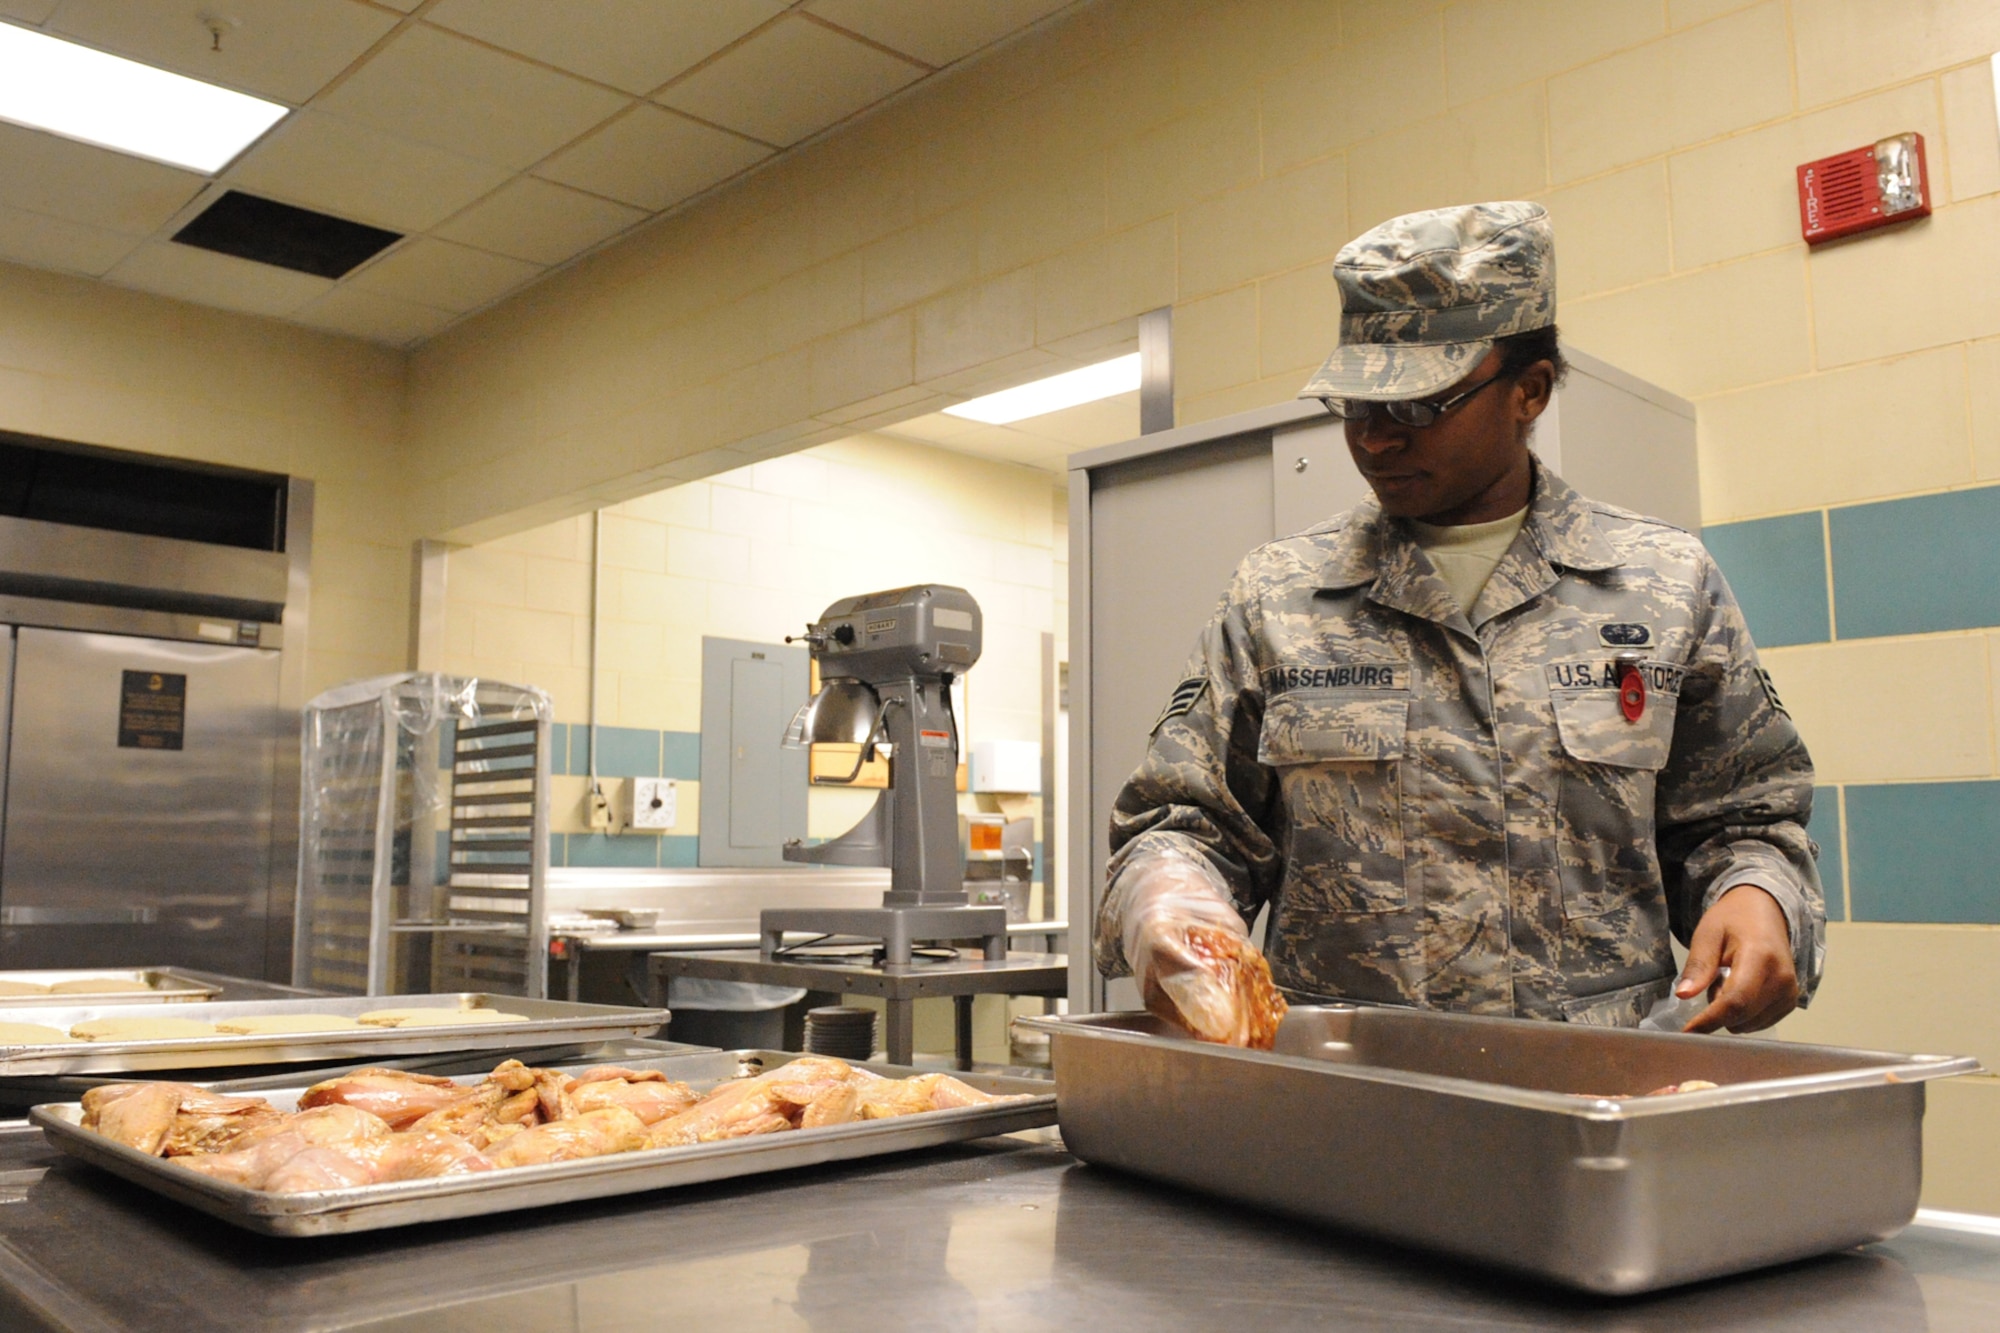 Senior Airman Ada Massenburg, 4th Force Support Squadron services apprentice, marinades chicken at the Southern Eagle Dining Facility on Seymour Johnson Air Force Base, N.C., June 16, 2009. Airman Massenburg received training in restaurant, hotel, and fitness management. (U.S. Air Force photo by Airman 1st Class Whitney S. Lambert)